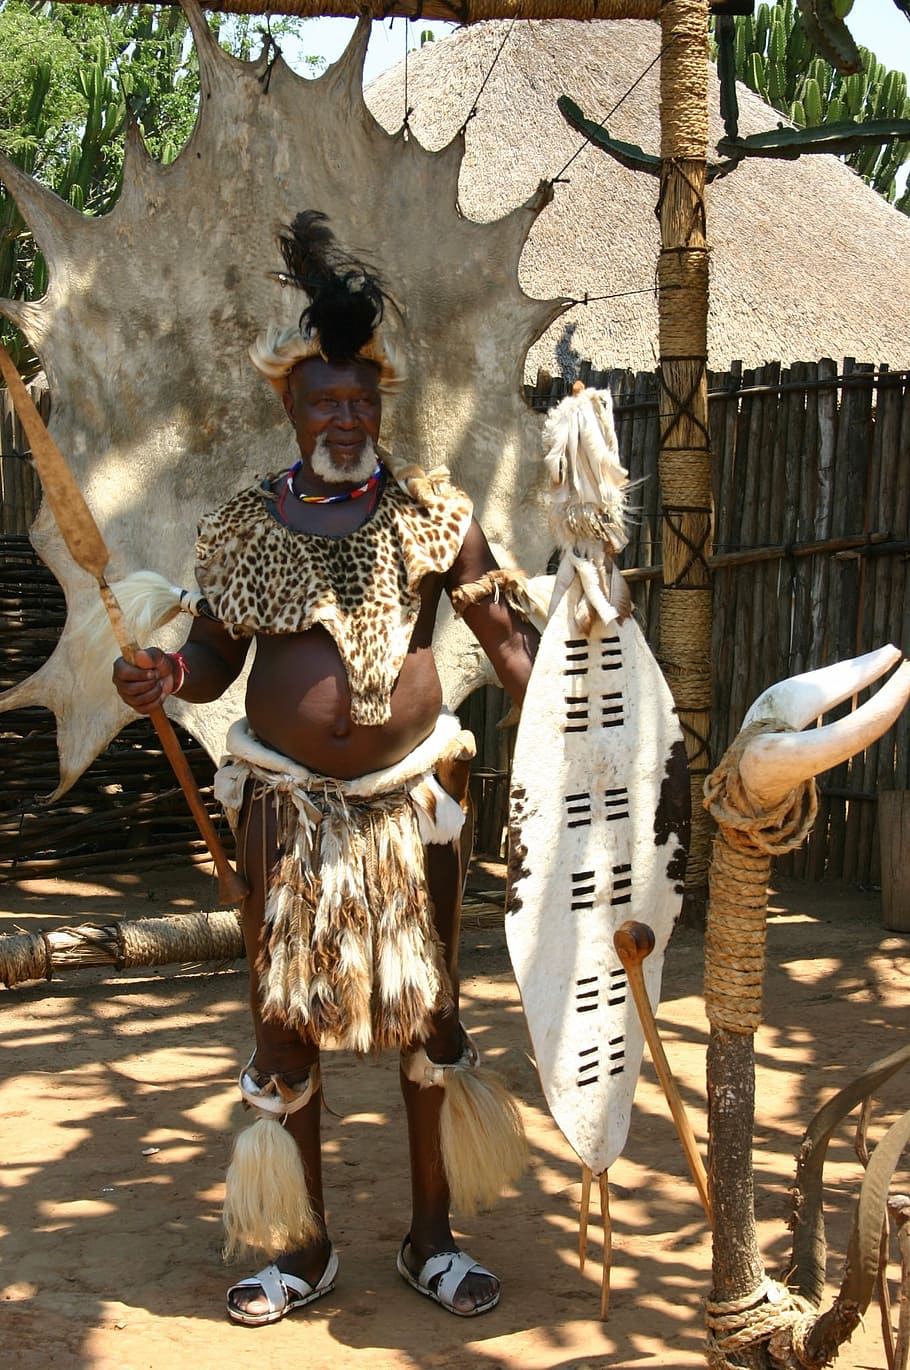 swaziland, warrior, south africa, real people, full length